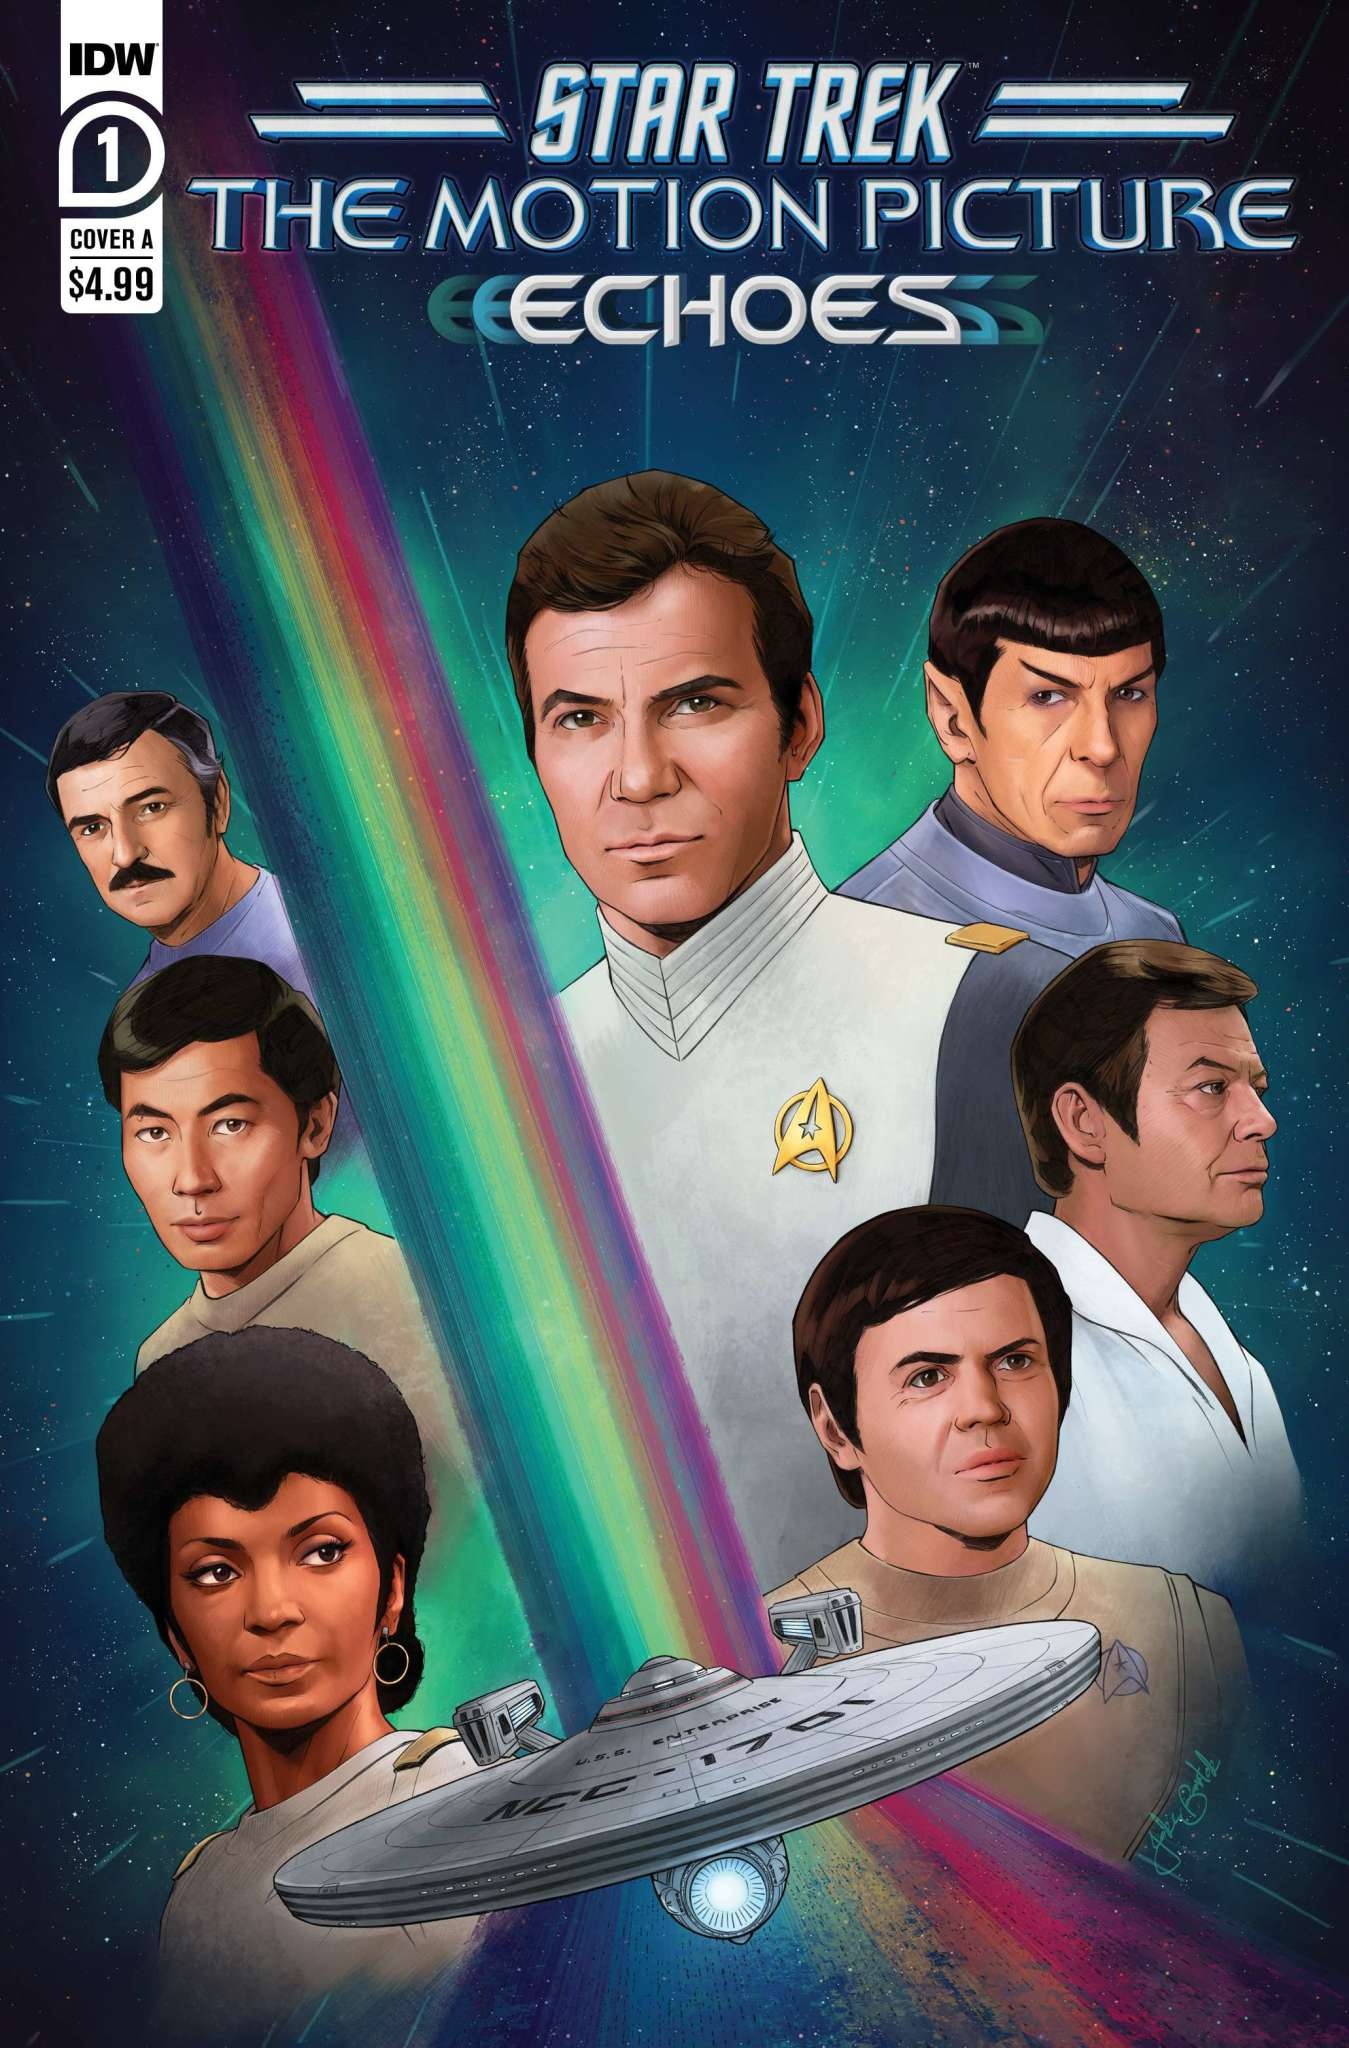 IDW Star Trek: The Motion Picture--Echoes #1 Cover A (Bartok)